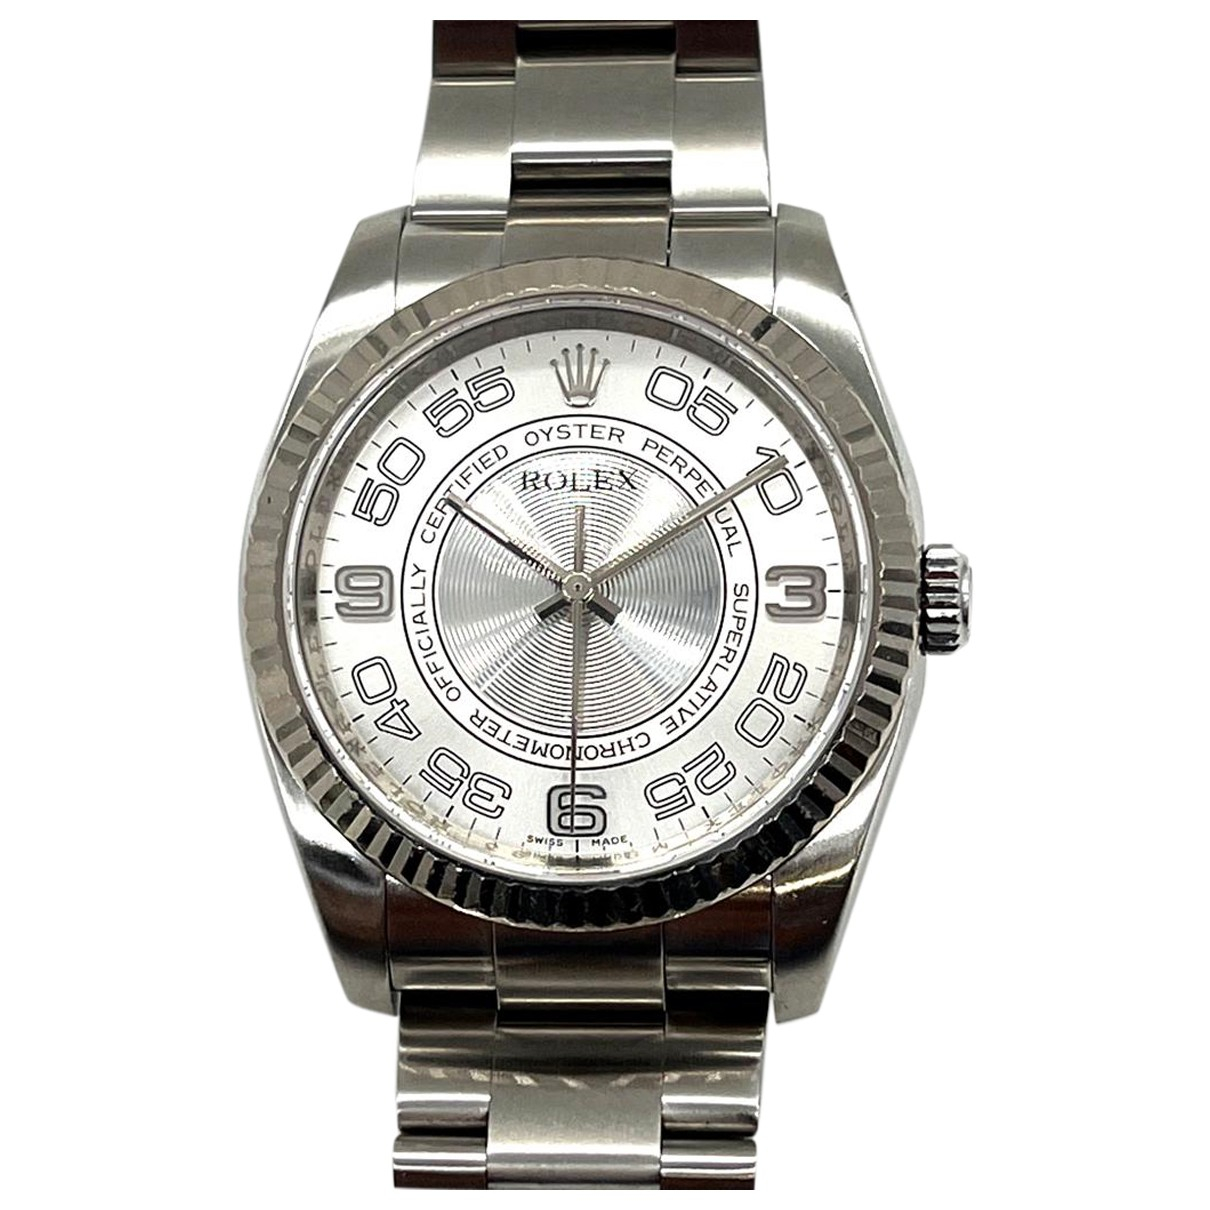 image of Rolex Oyster Perpetual 36mm white gold watch